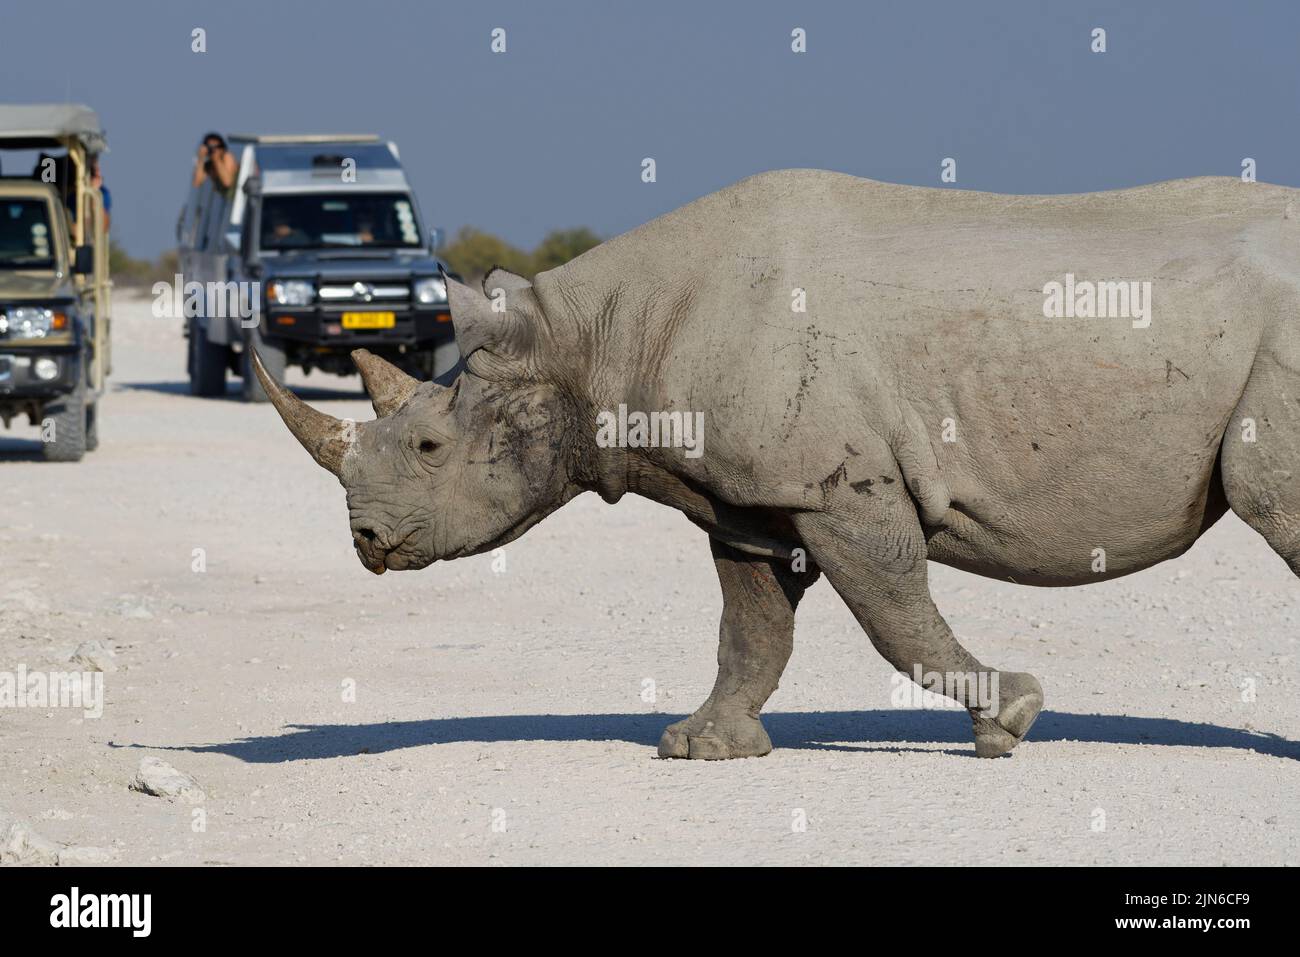 Black rhinoceros (Diceros bicornis), adult crossing a dirt road in front of two safari vehicles with passengers, Etosha National Park, Namibia, Africa Stock Photo